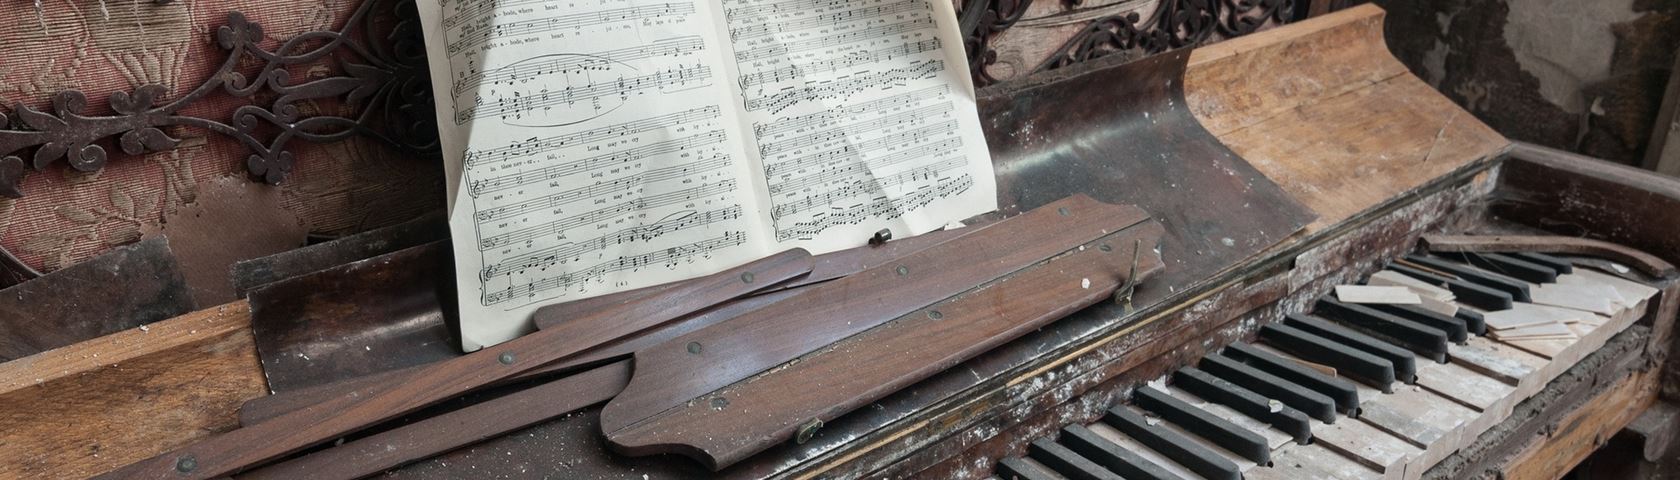 Abandoned and Decayed Piano